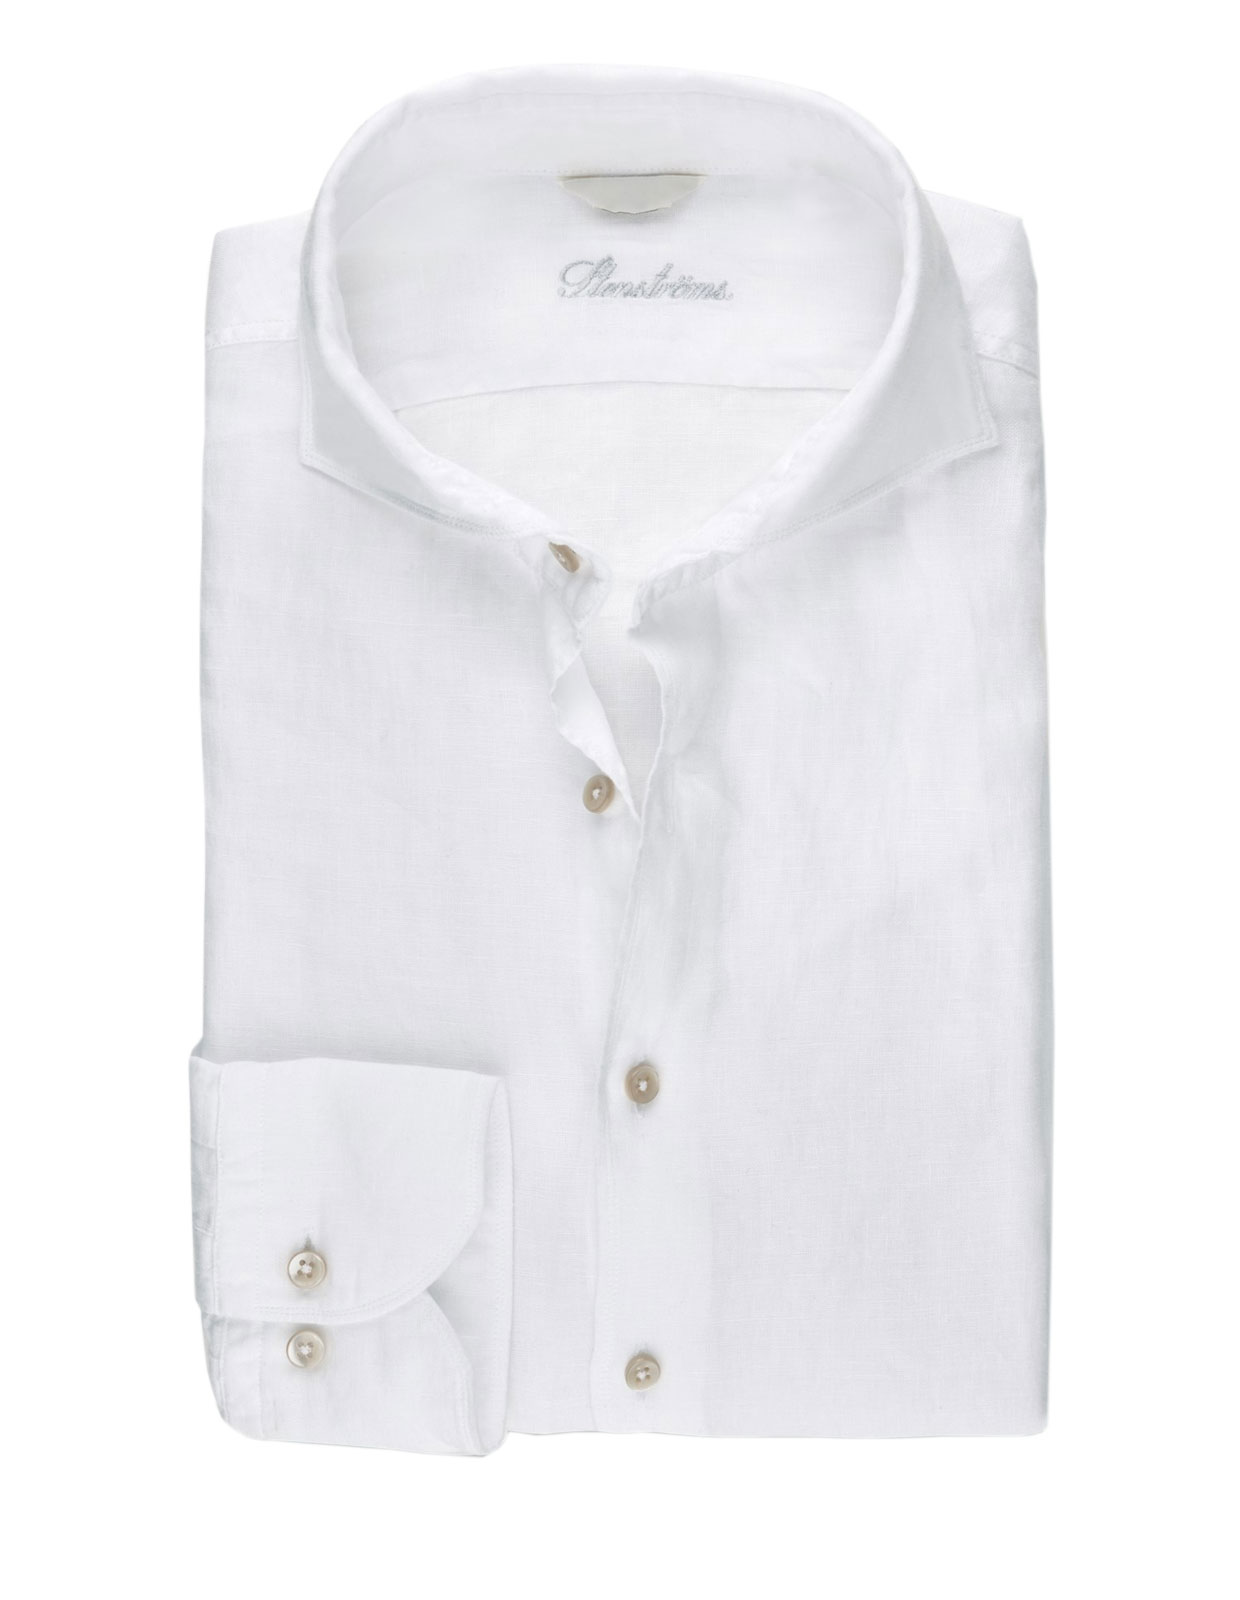 Fitted Body Linen Shirt White Stl L